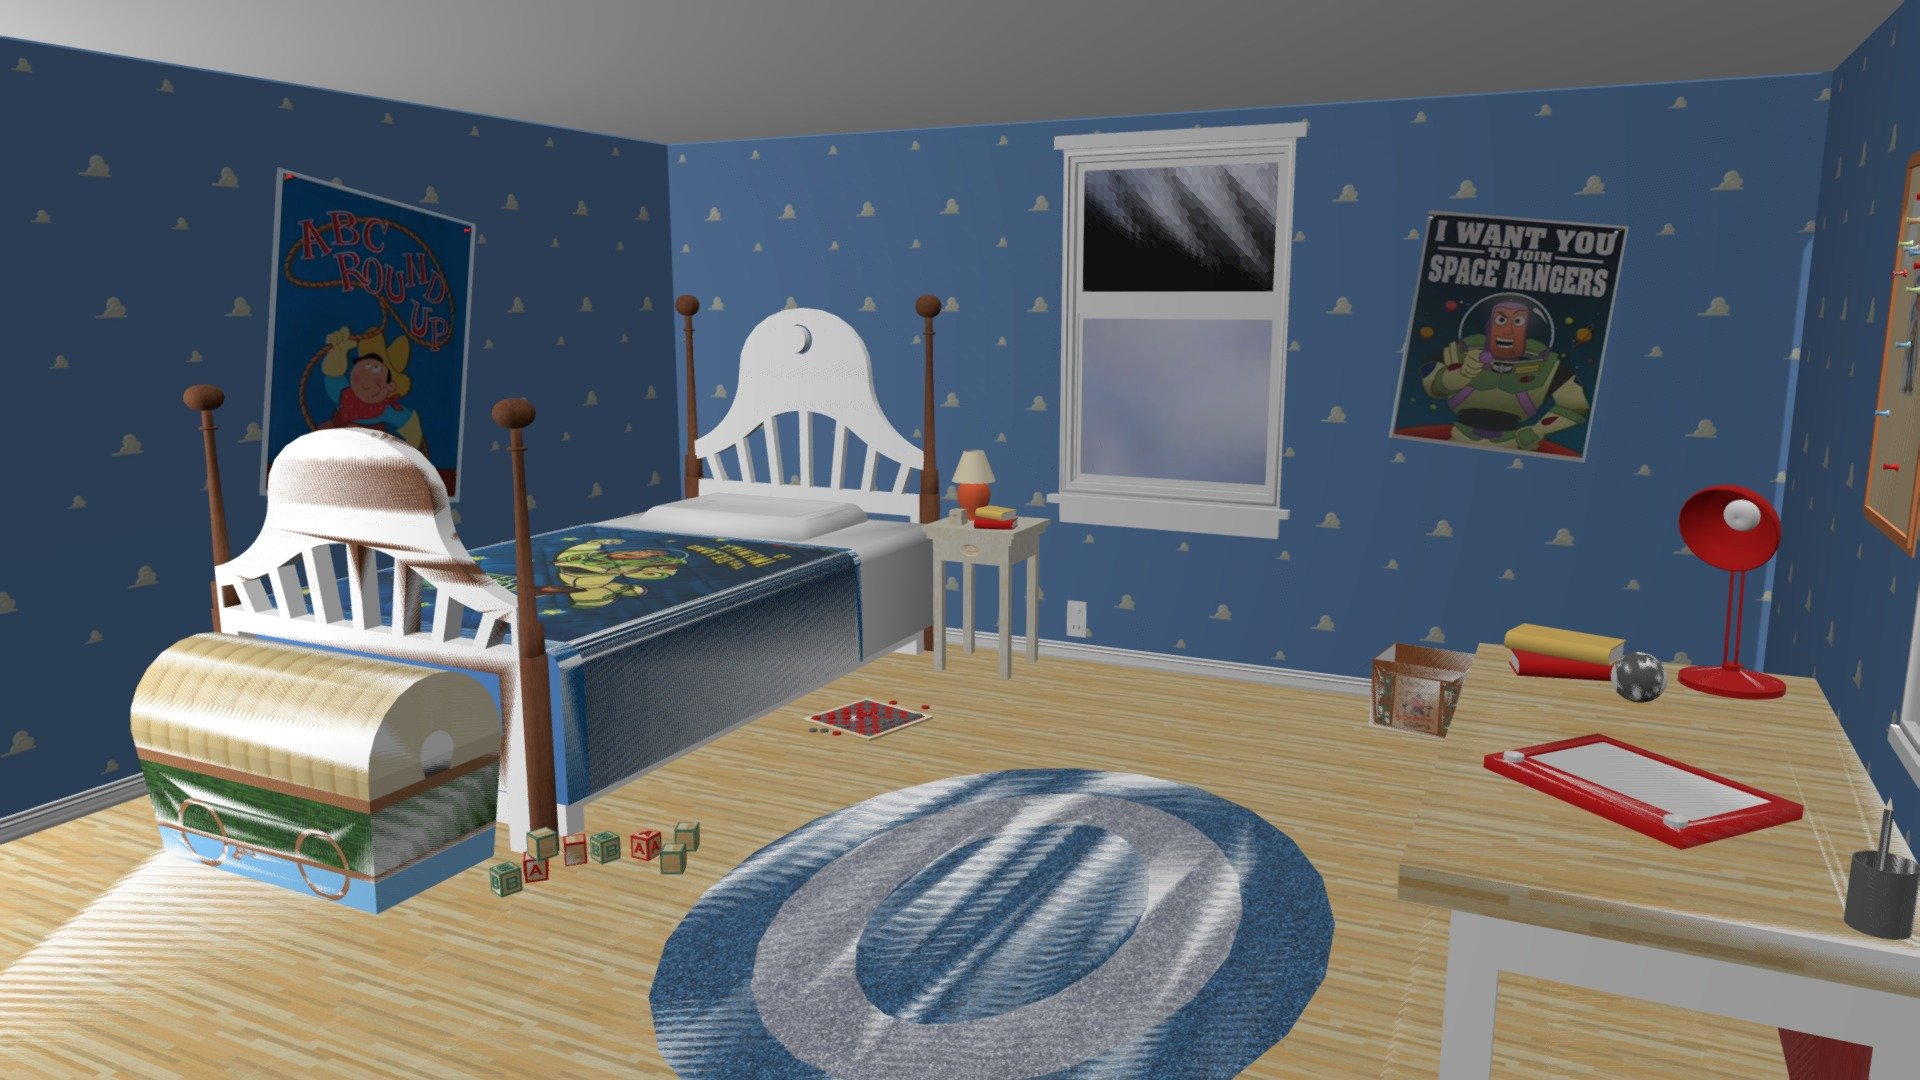 Toy Story Andy room - 3D model by jetpack10 (@samuelcrevier) 3d model